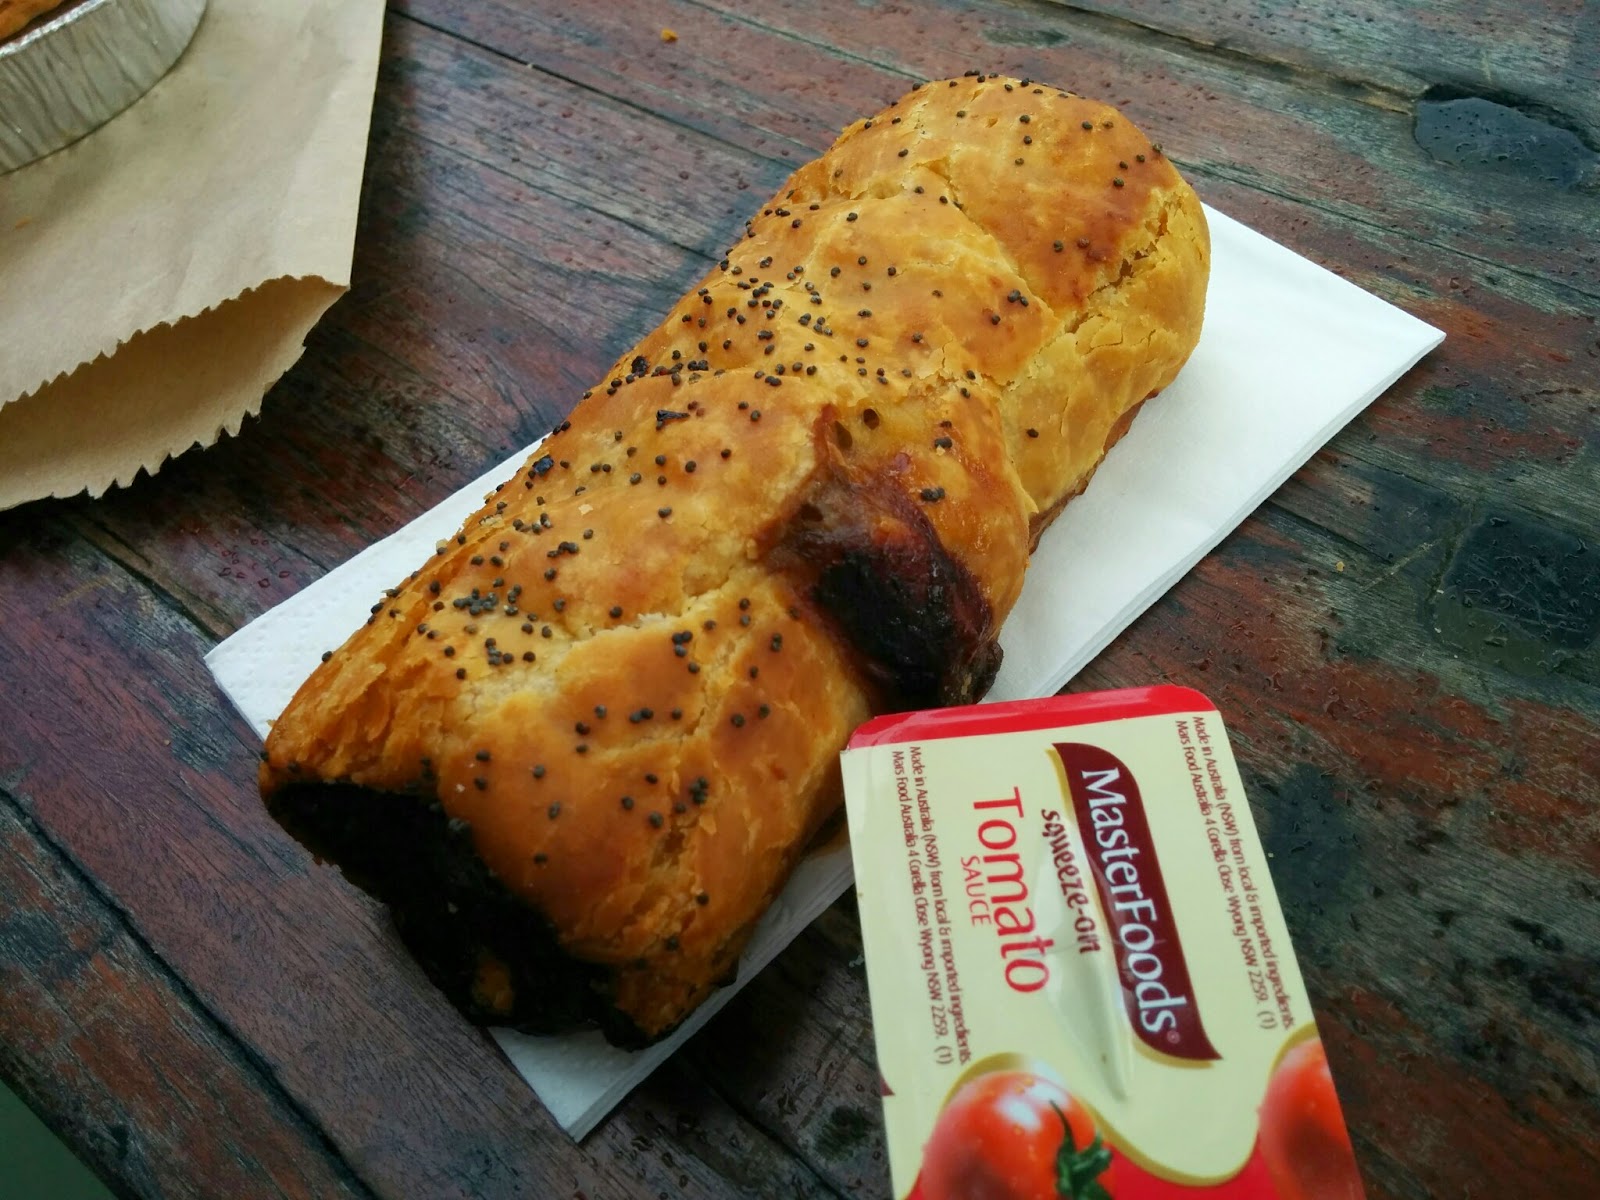 “Lamb and Almond Sausage Roll”